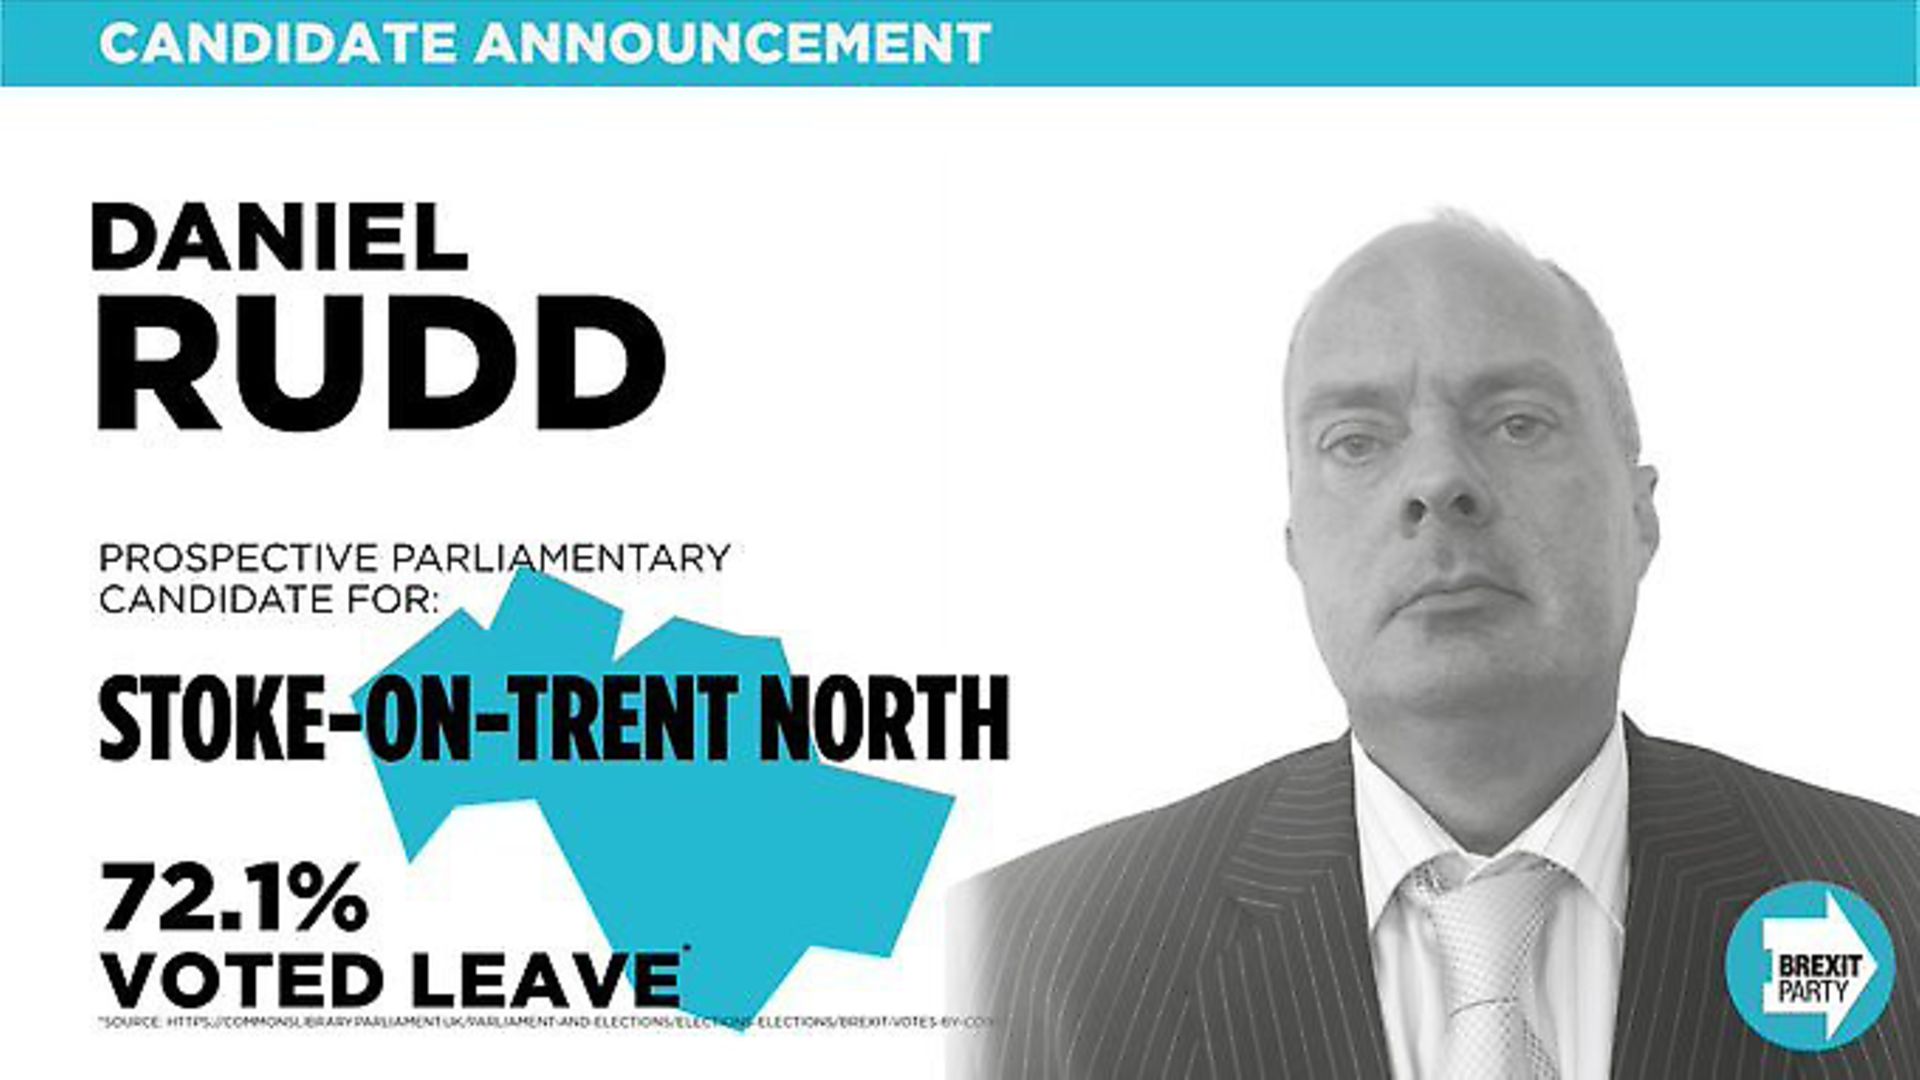 Brexit Party general election candidate for Stoke-on-Trent north Daniel Rudd referred to immigrants as 'gimme-grunts' in a tweet. Picture: The Brexit Party - Credit: The Brexit Party